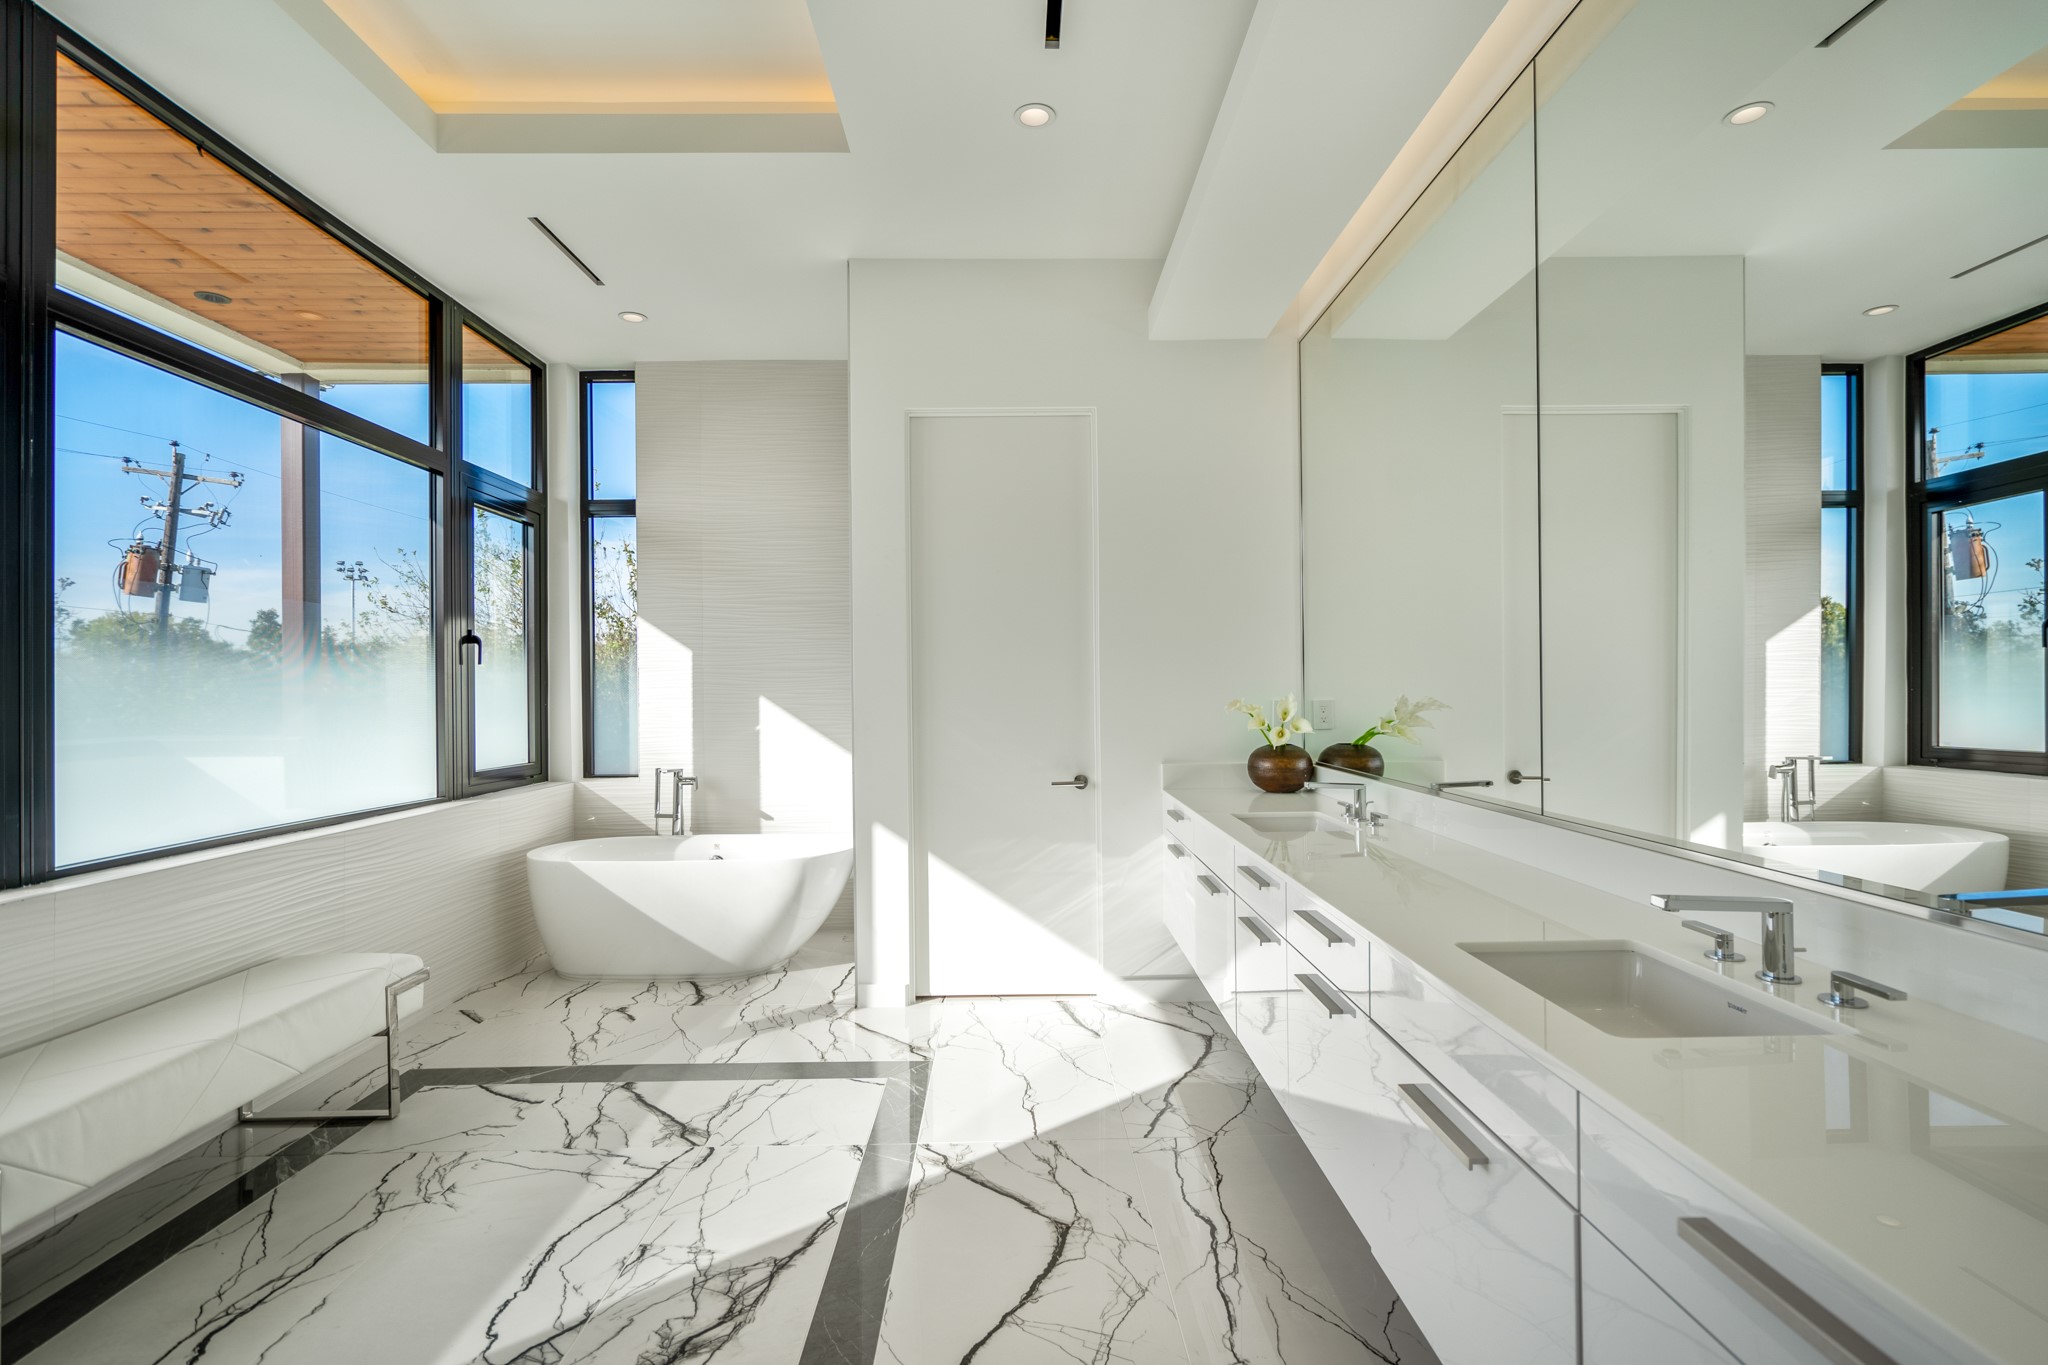 Now step inside this open and spacious primary bathroom.